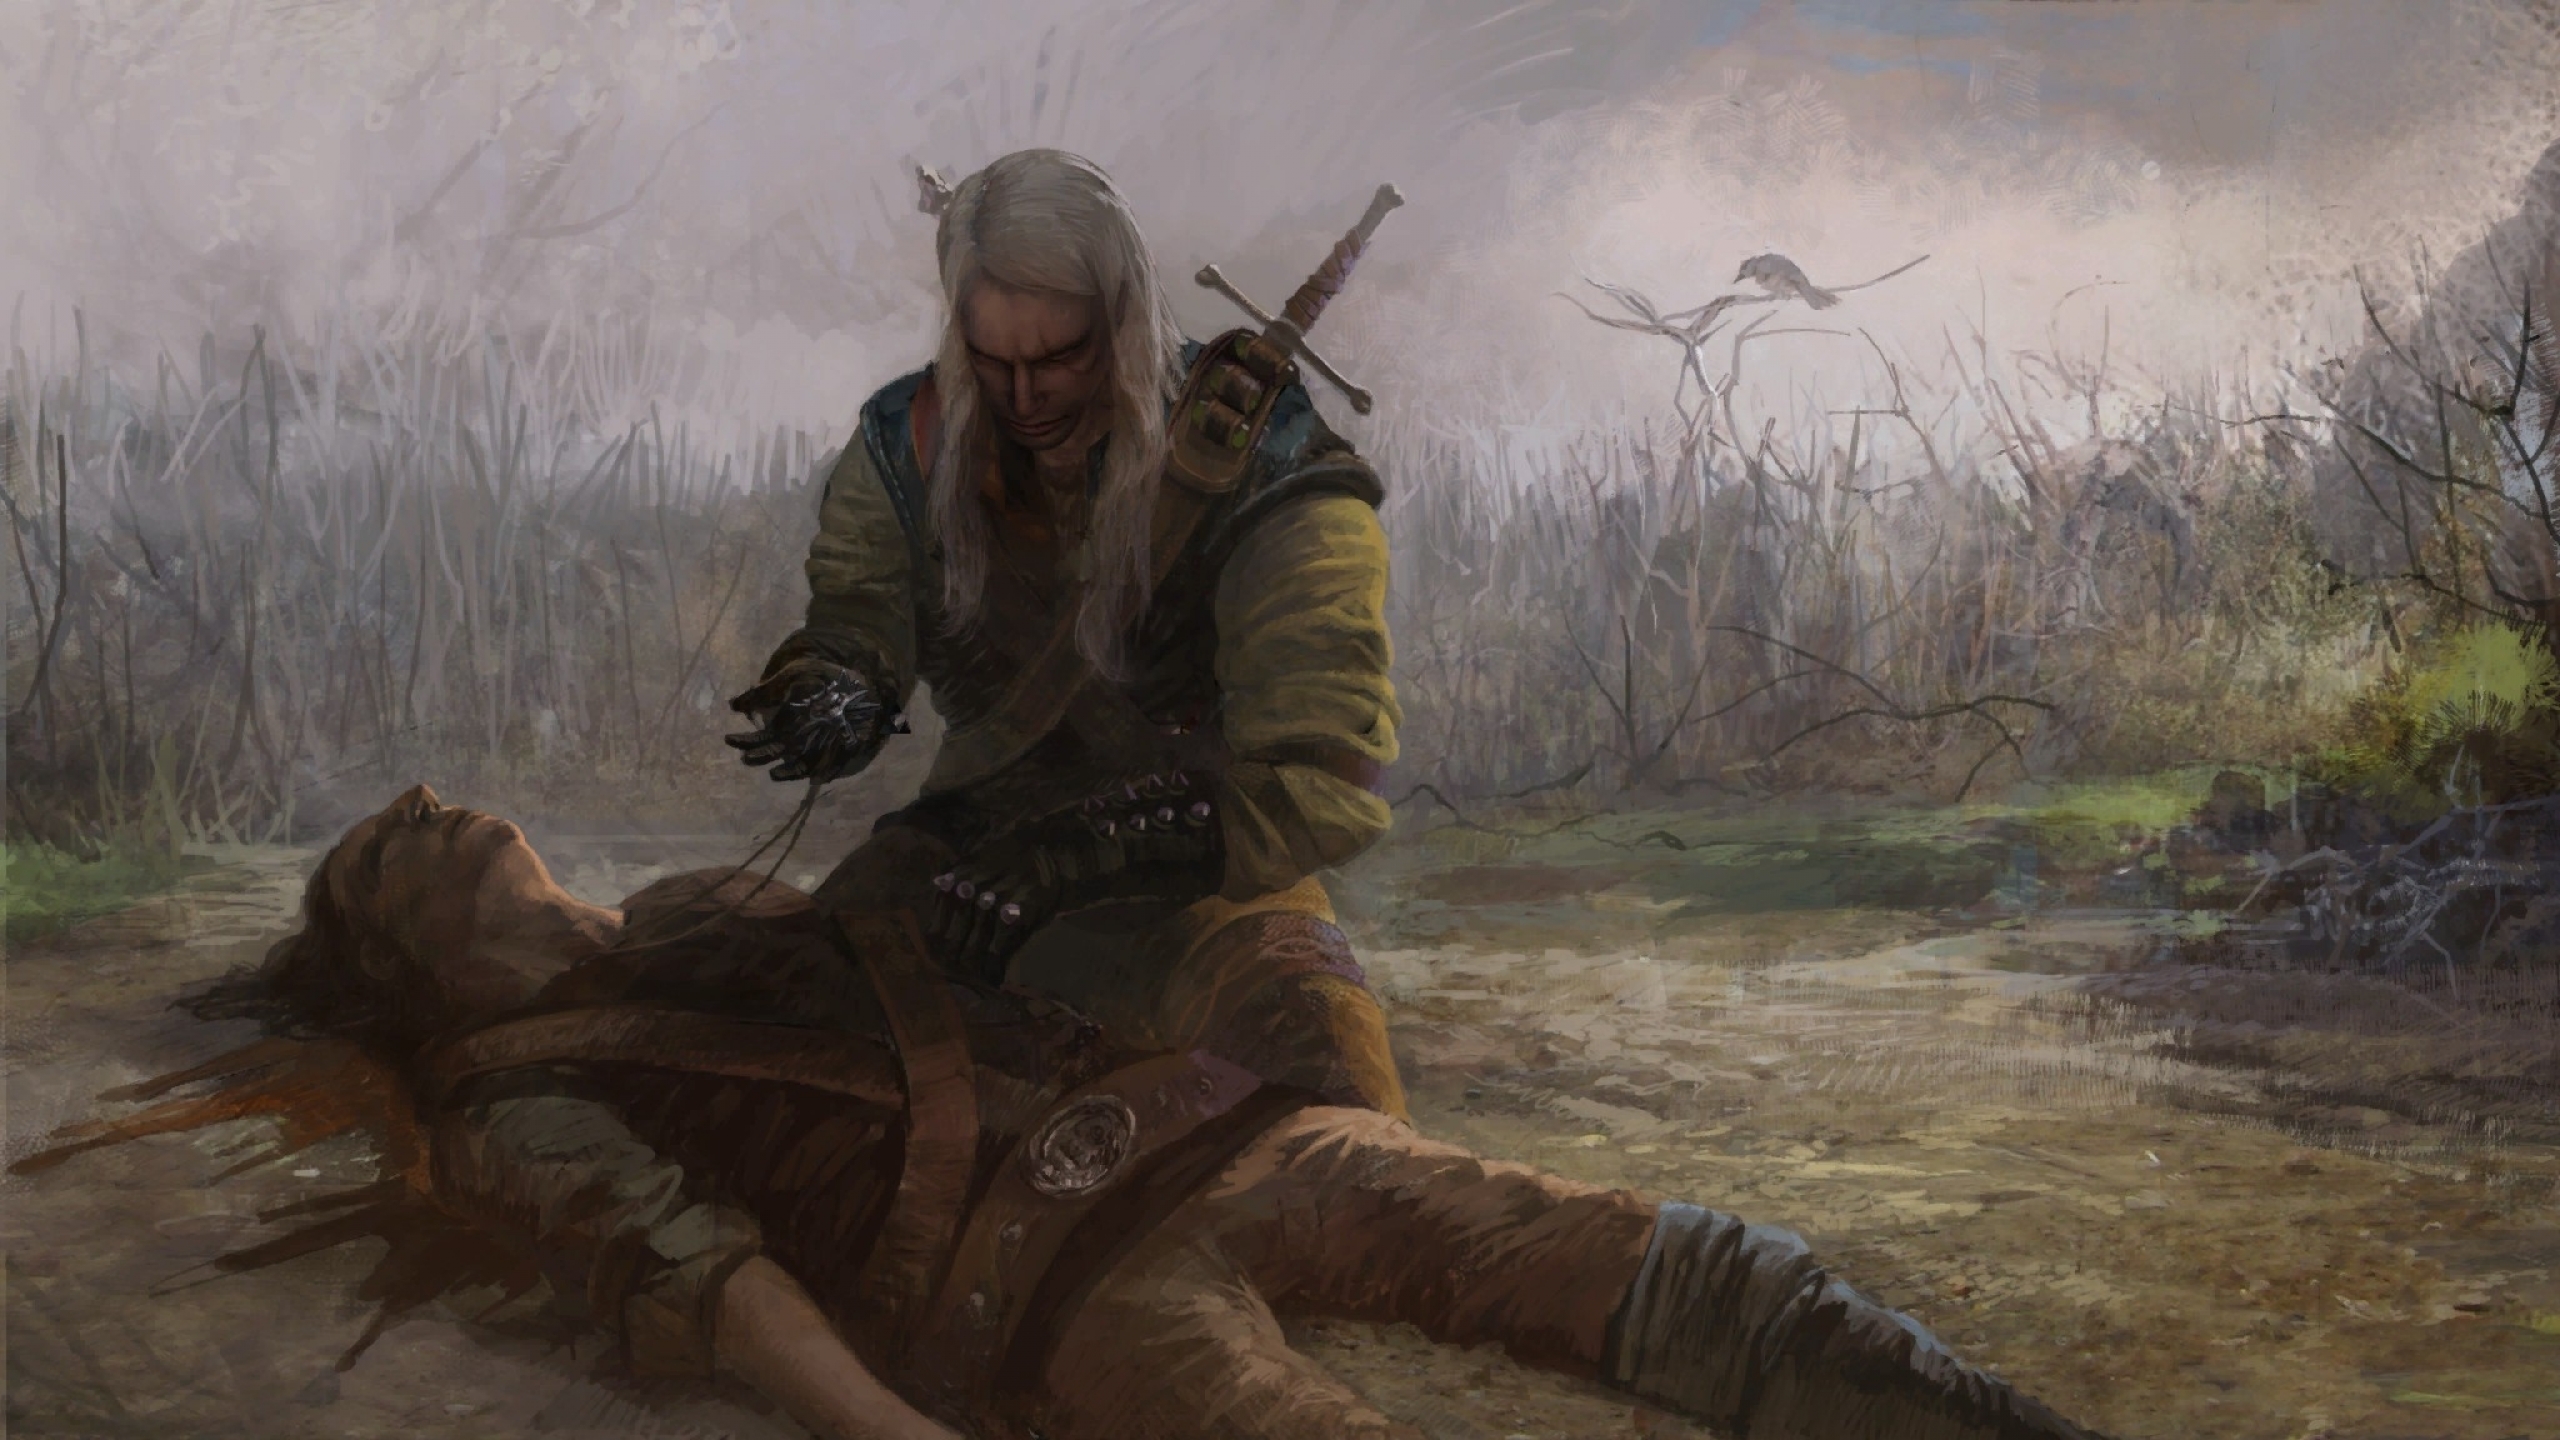 Download Wallpapers Download 2560x1440 video games rpg pc the witcher 2560x1440